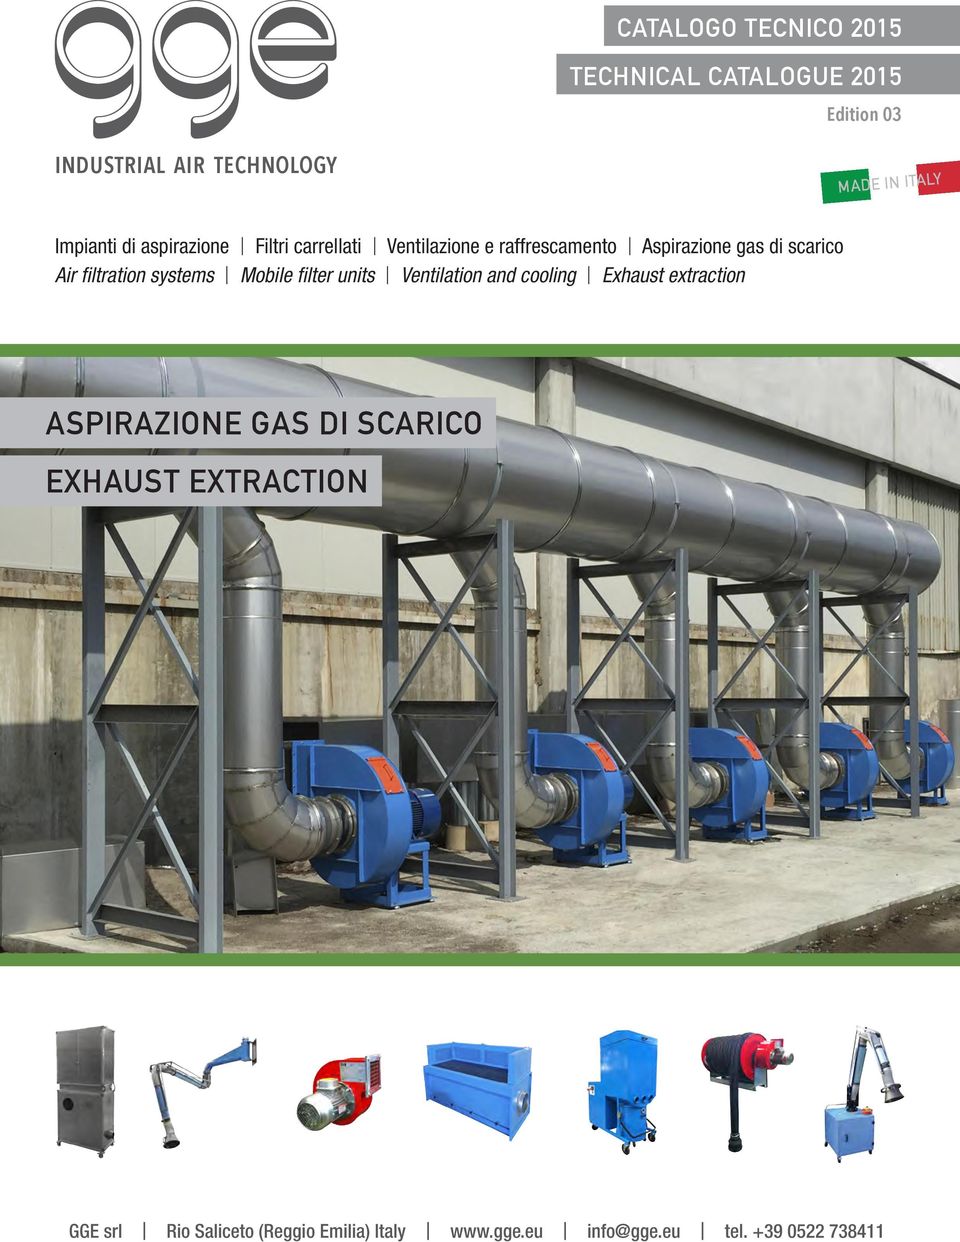 systems Mobile filter units Ventilation and cooling Exhaust extraction ASPIRAZIONE GAS DI SCARICO